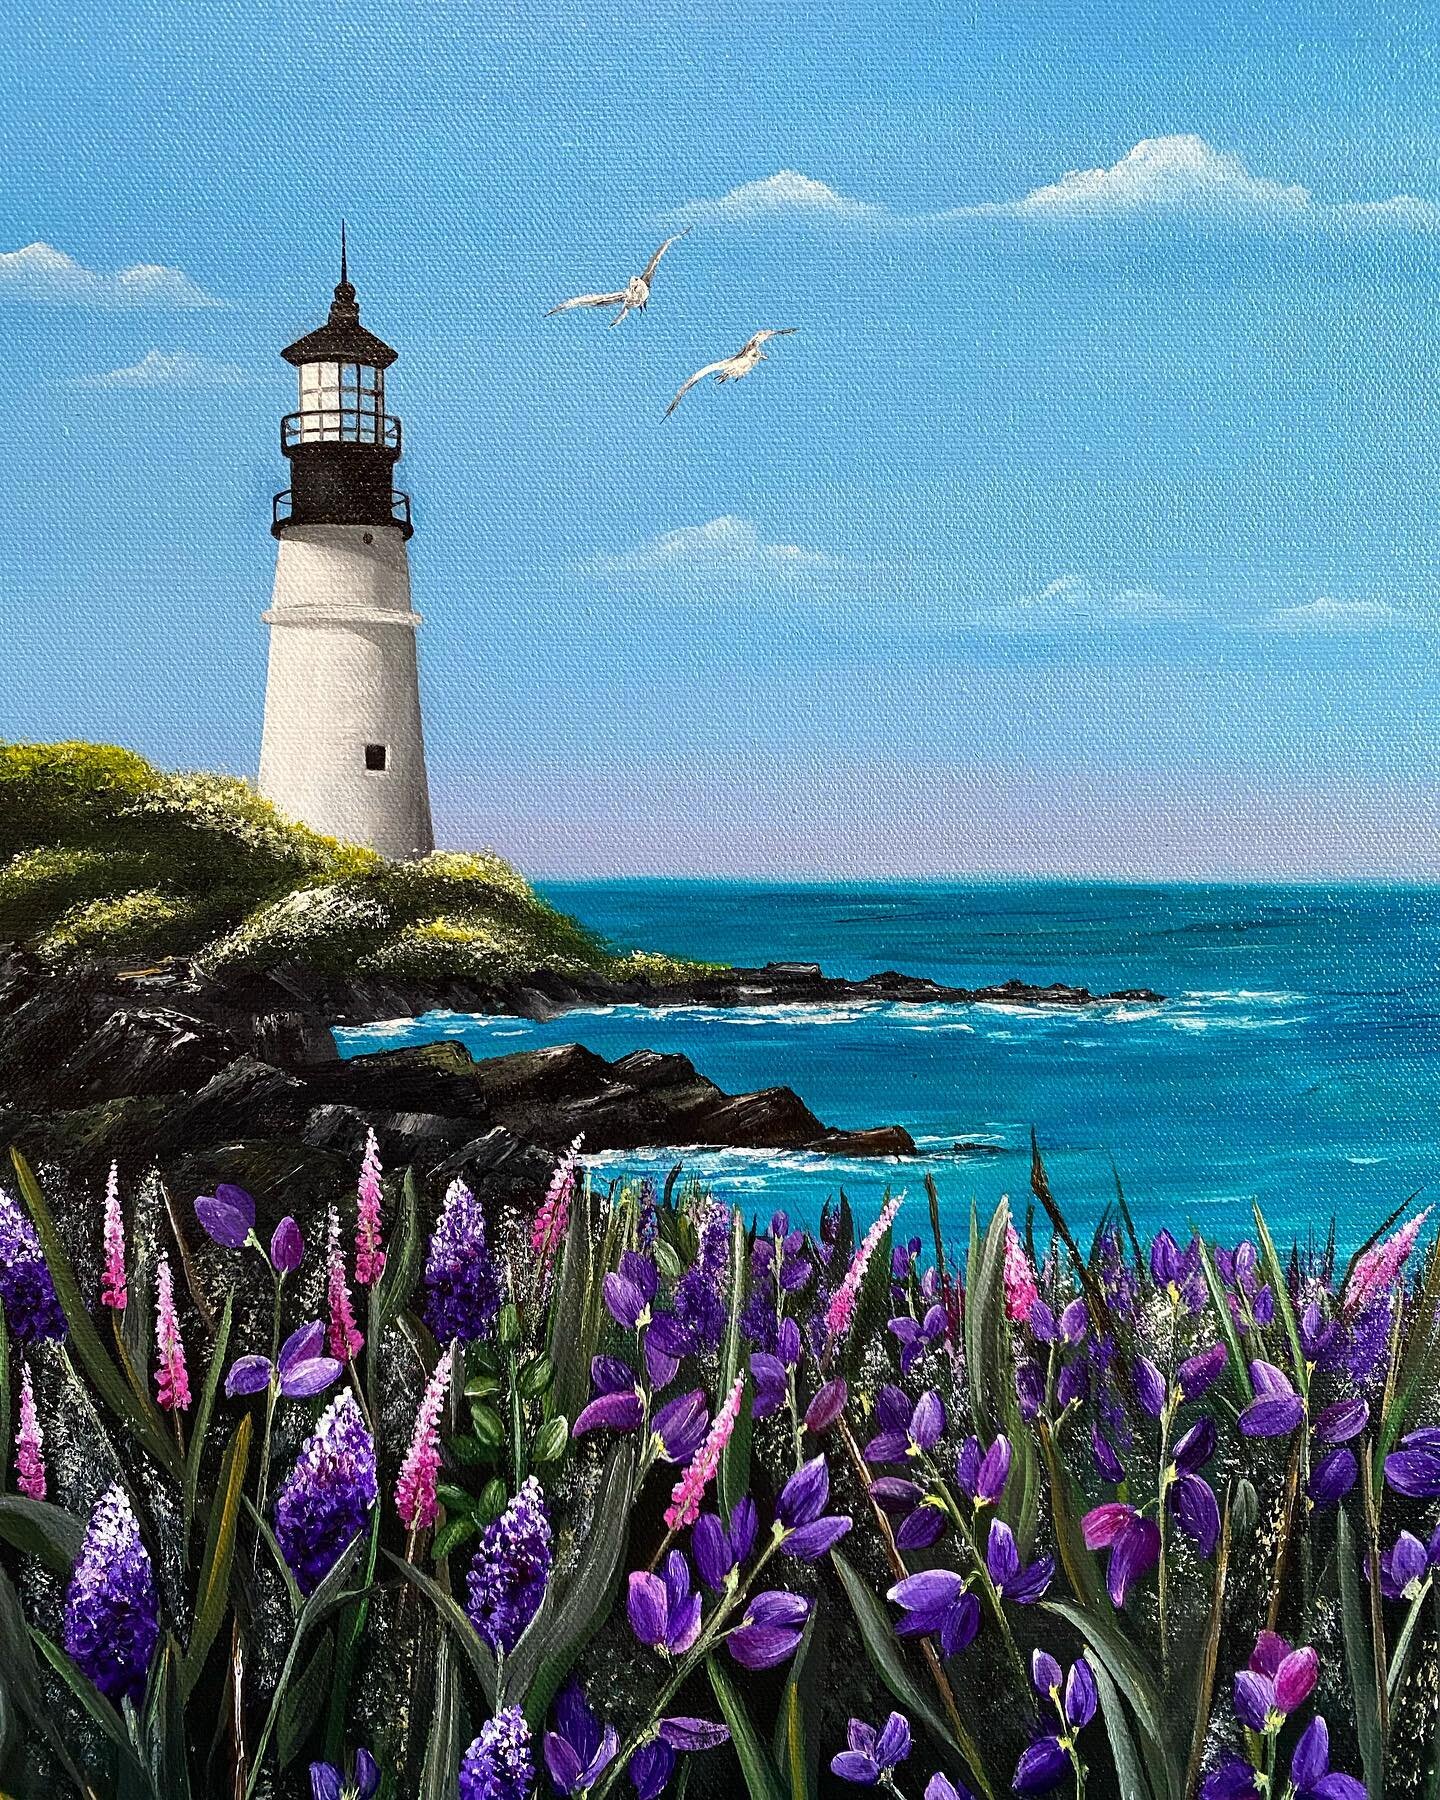 Swipe to see the second half of the canvas.🤍Absolutely loved painting this custom-designed piece for an ocean, flowers, ship, and lighthouse lover.💙
.
Acrylic on 18x24 @blickartmaterials premier stretched canvas, finished with @winsorandnewton glos